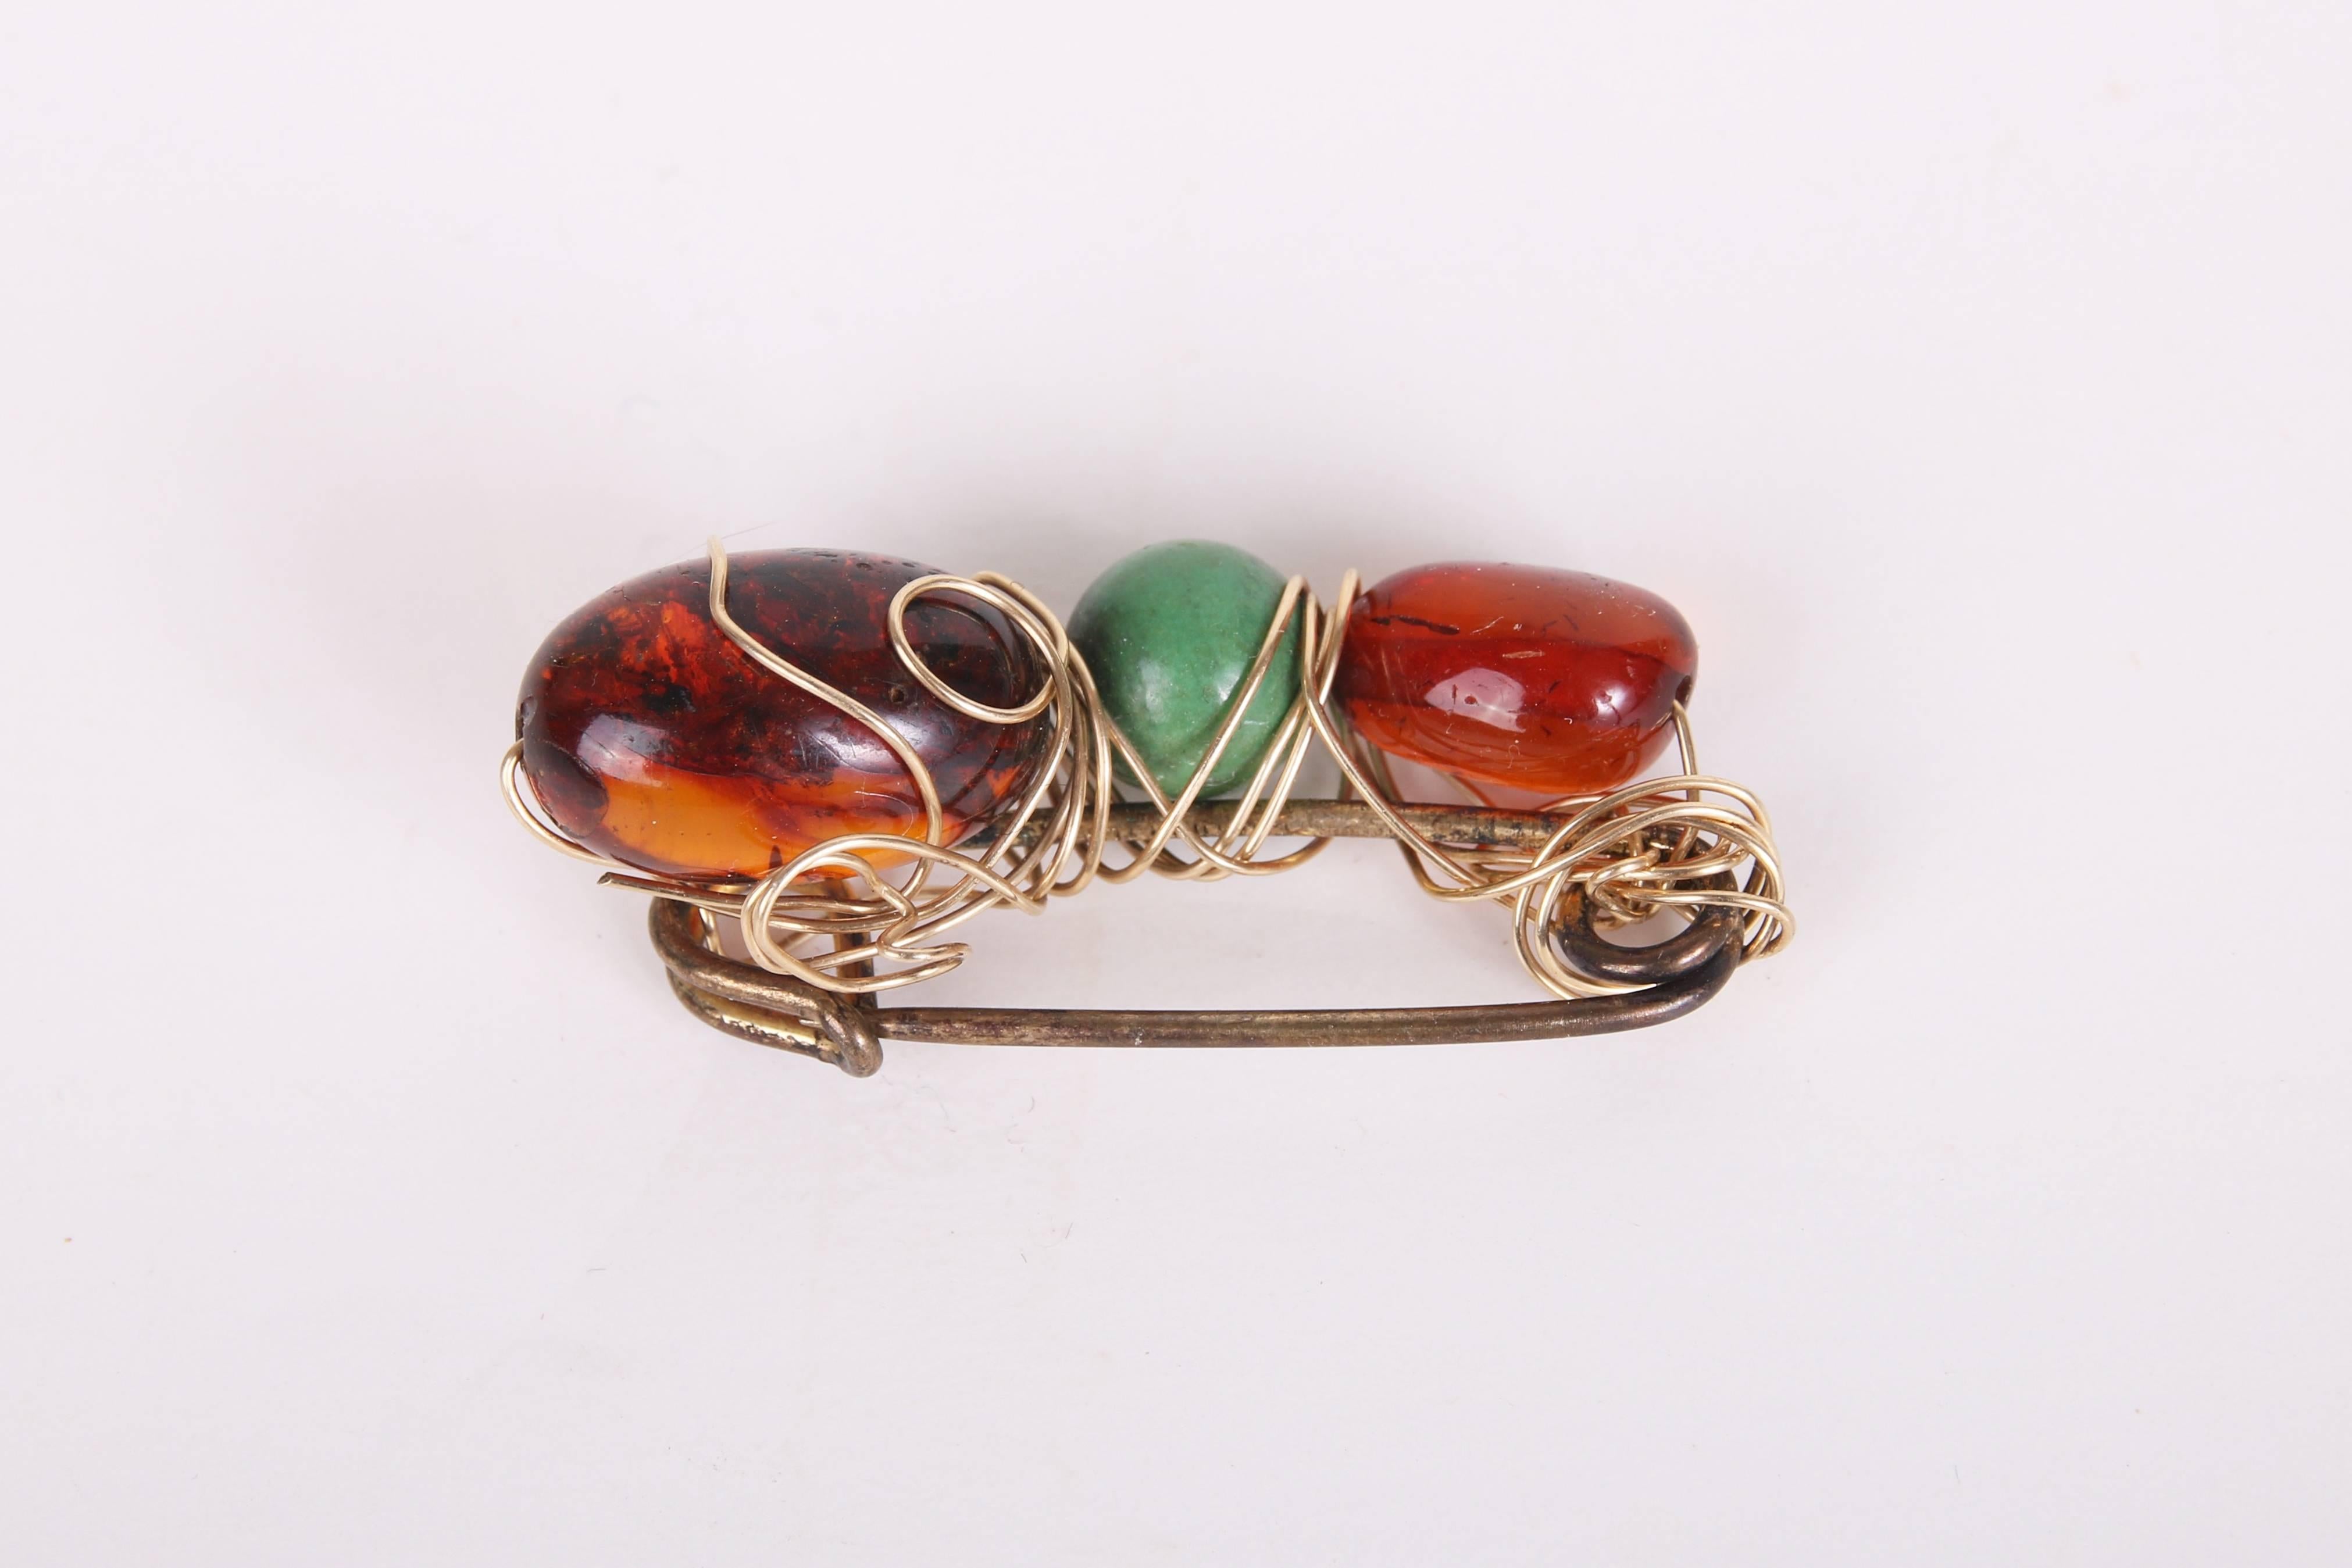 Kazuko 14k wire wrapped beaded safety pin brooch with three crystal beads - two brown and one green. In very good condition with some tarnish on the safety pin.
MEASUREMENTS:
Length - 1 5/8